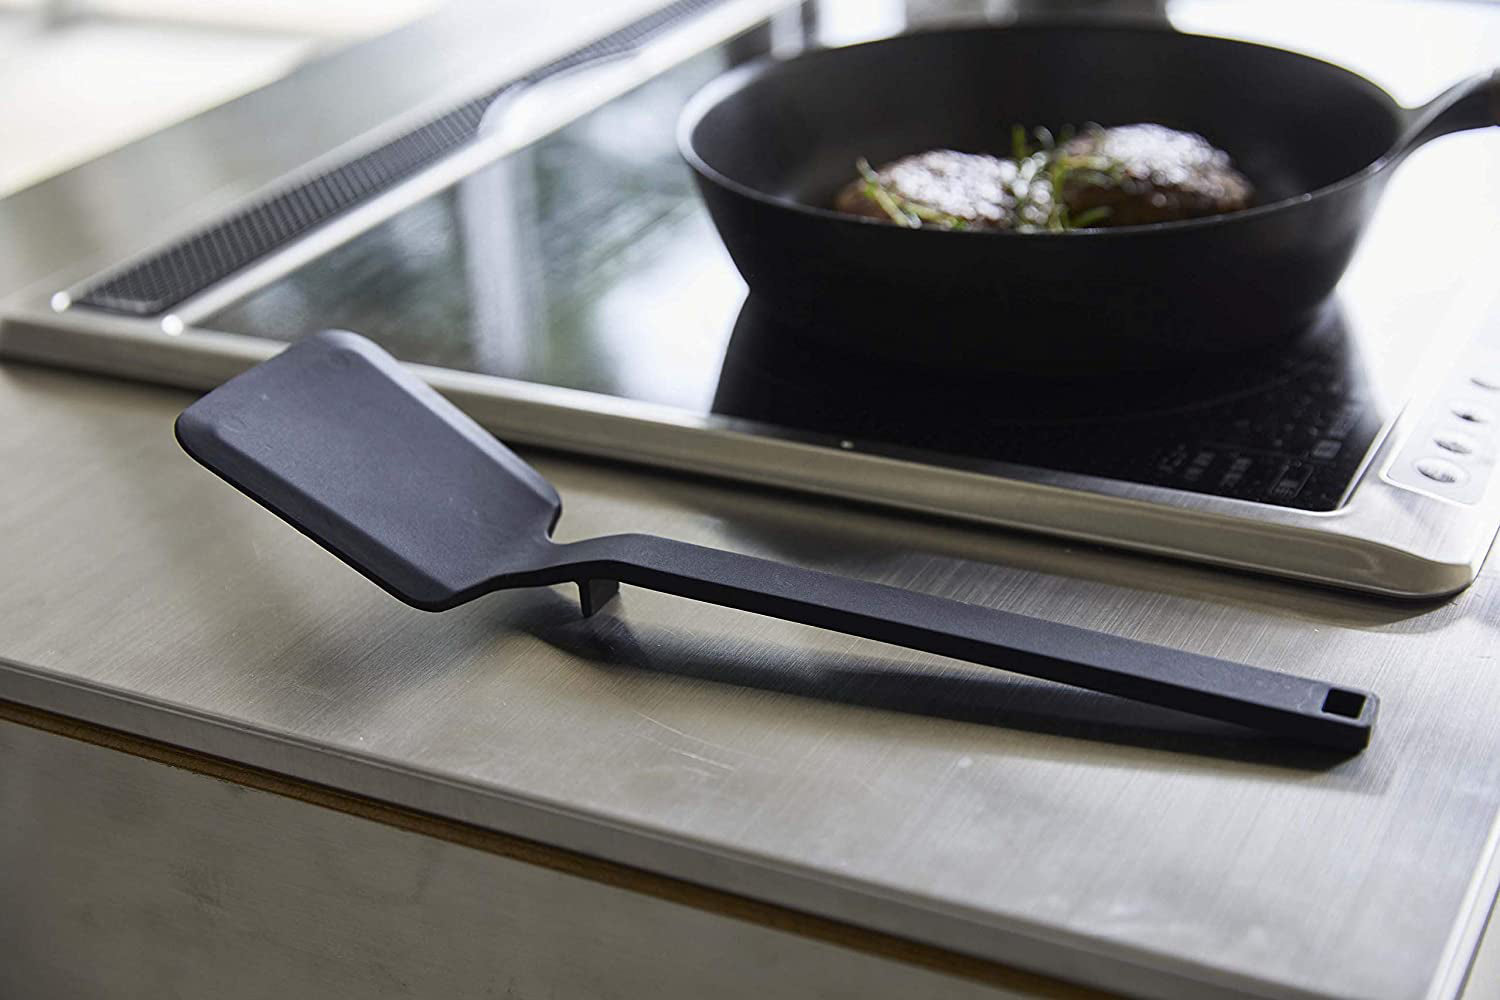 View 9 - Side view of black Floating Spatula on kitchen counter by Yamazaki Home.